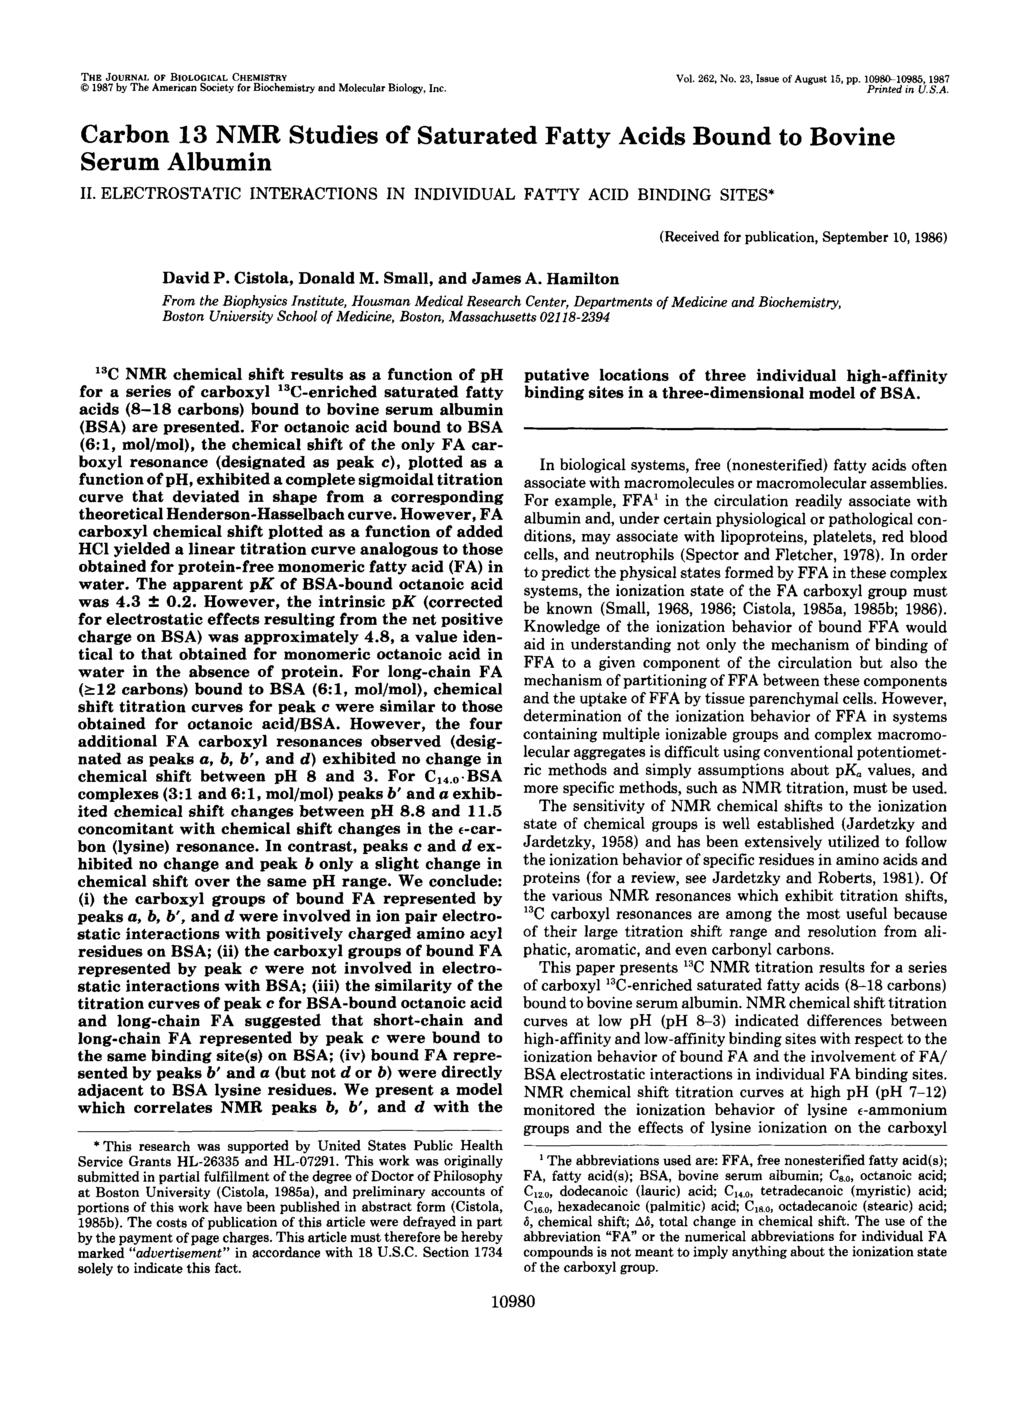 THE JOURNAL OF BIOLOGICAL CHEMISTRY 0 1987 by The American Society for Biochemistry and Molecular Biology, Inc. Vol. 262, No. 23, Issue of August 15, pp. 10980-10985,1987 Printed in W.S.A. Carbon 13 NMR Studies of Saturated Fatty Acids Bound to Bovine Serum Albumin 11.